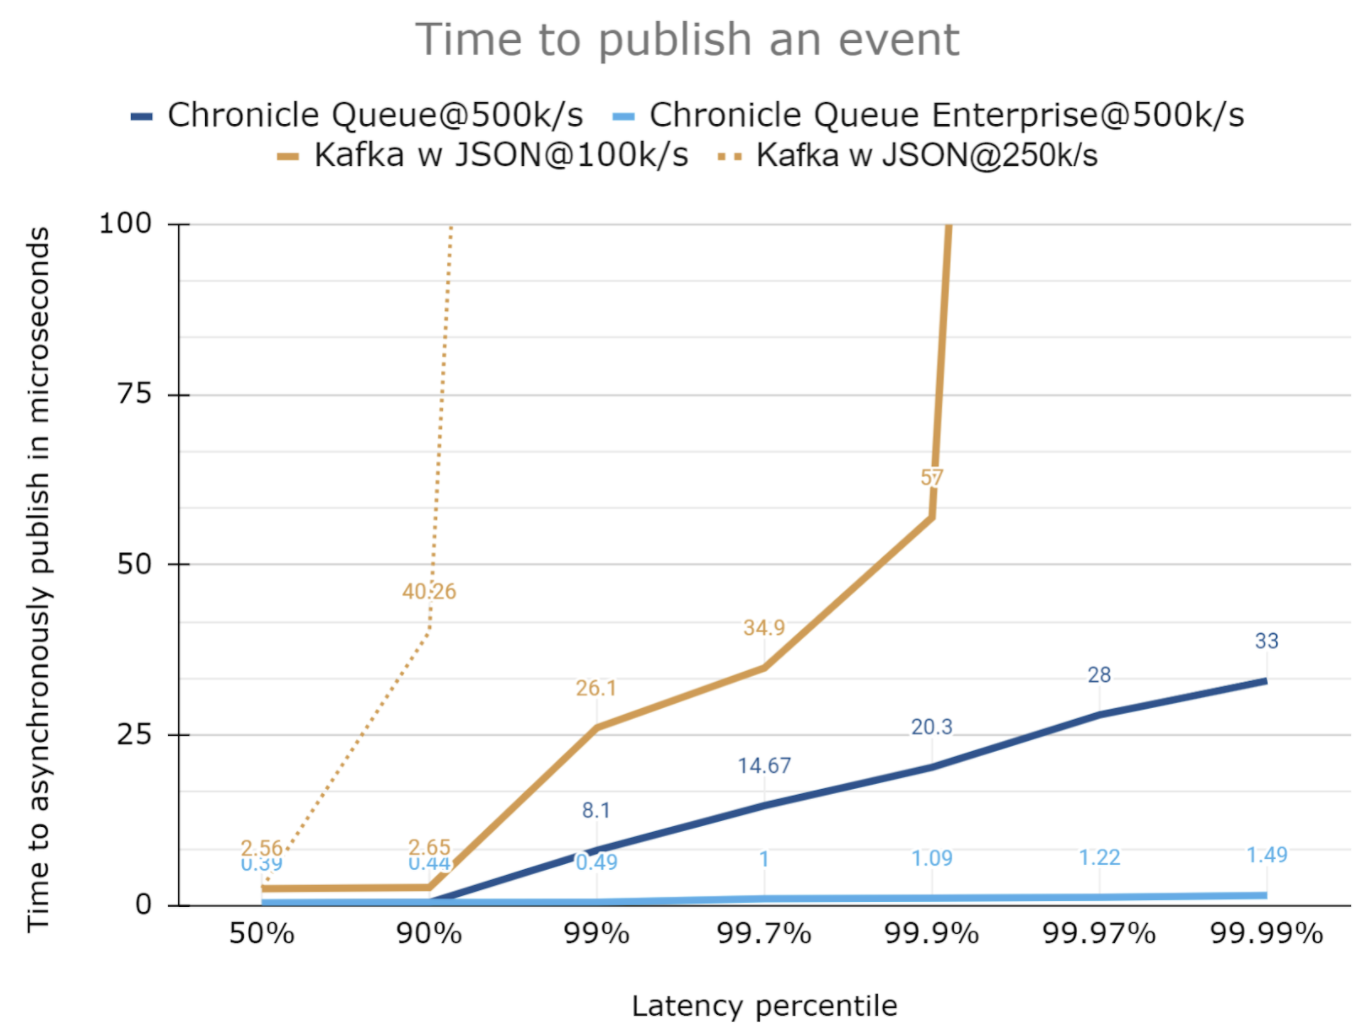 Comparing typical latency to publish